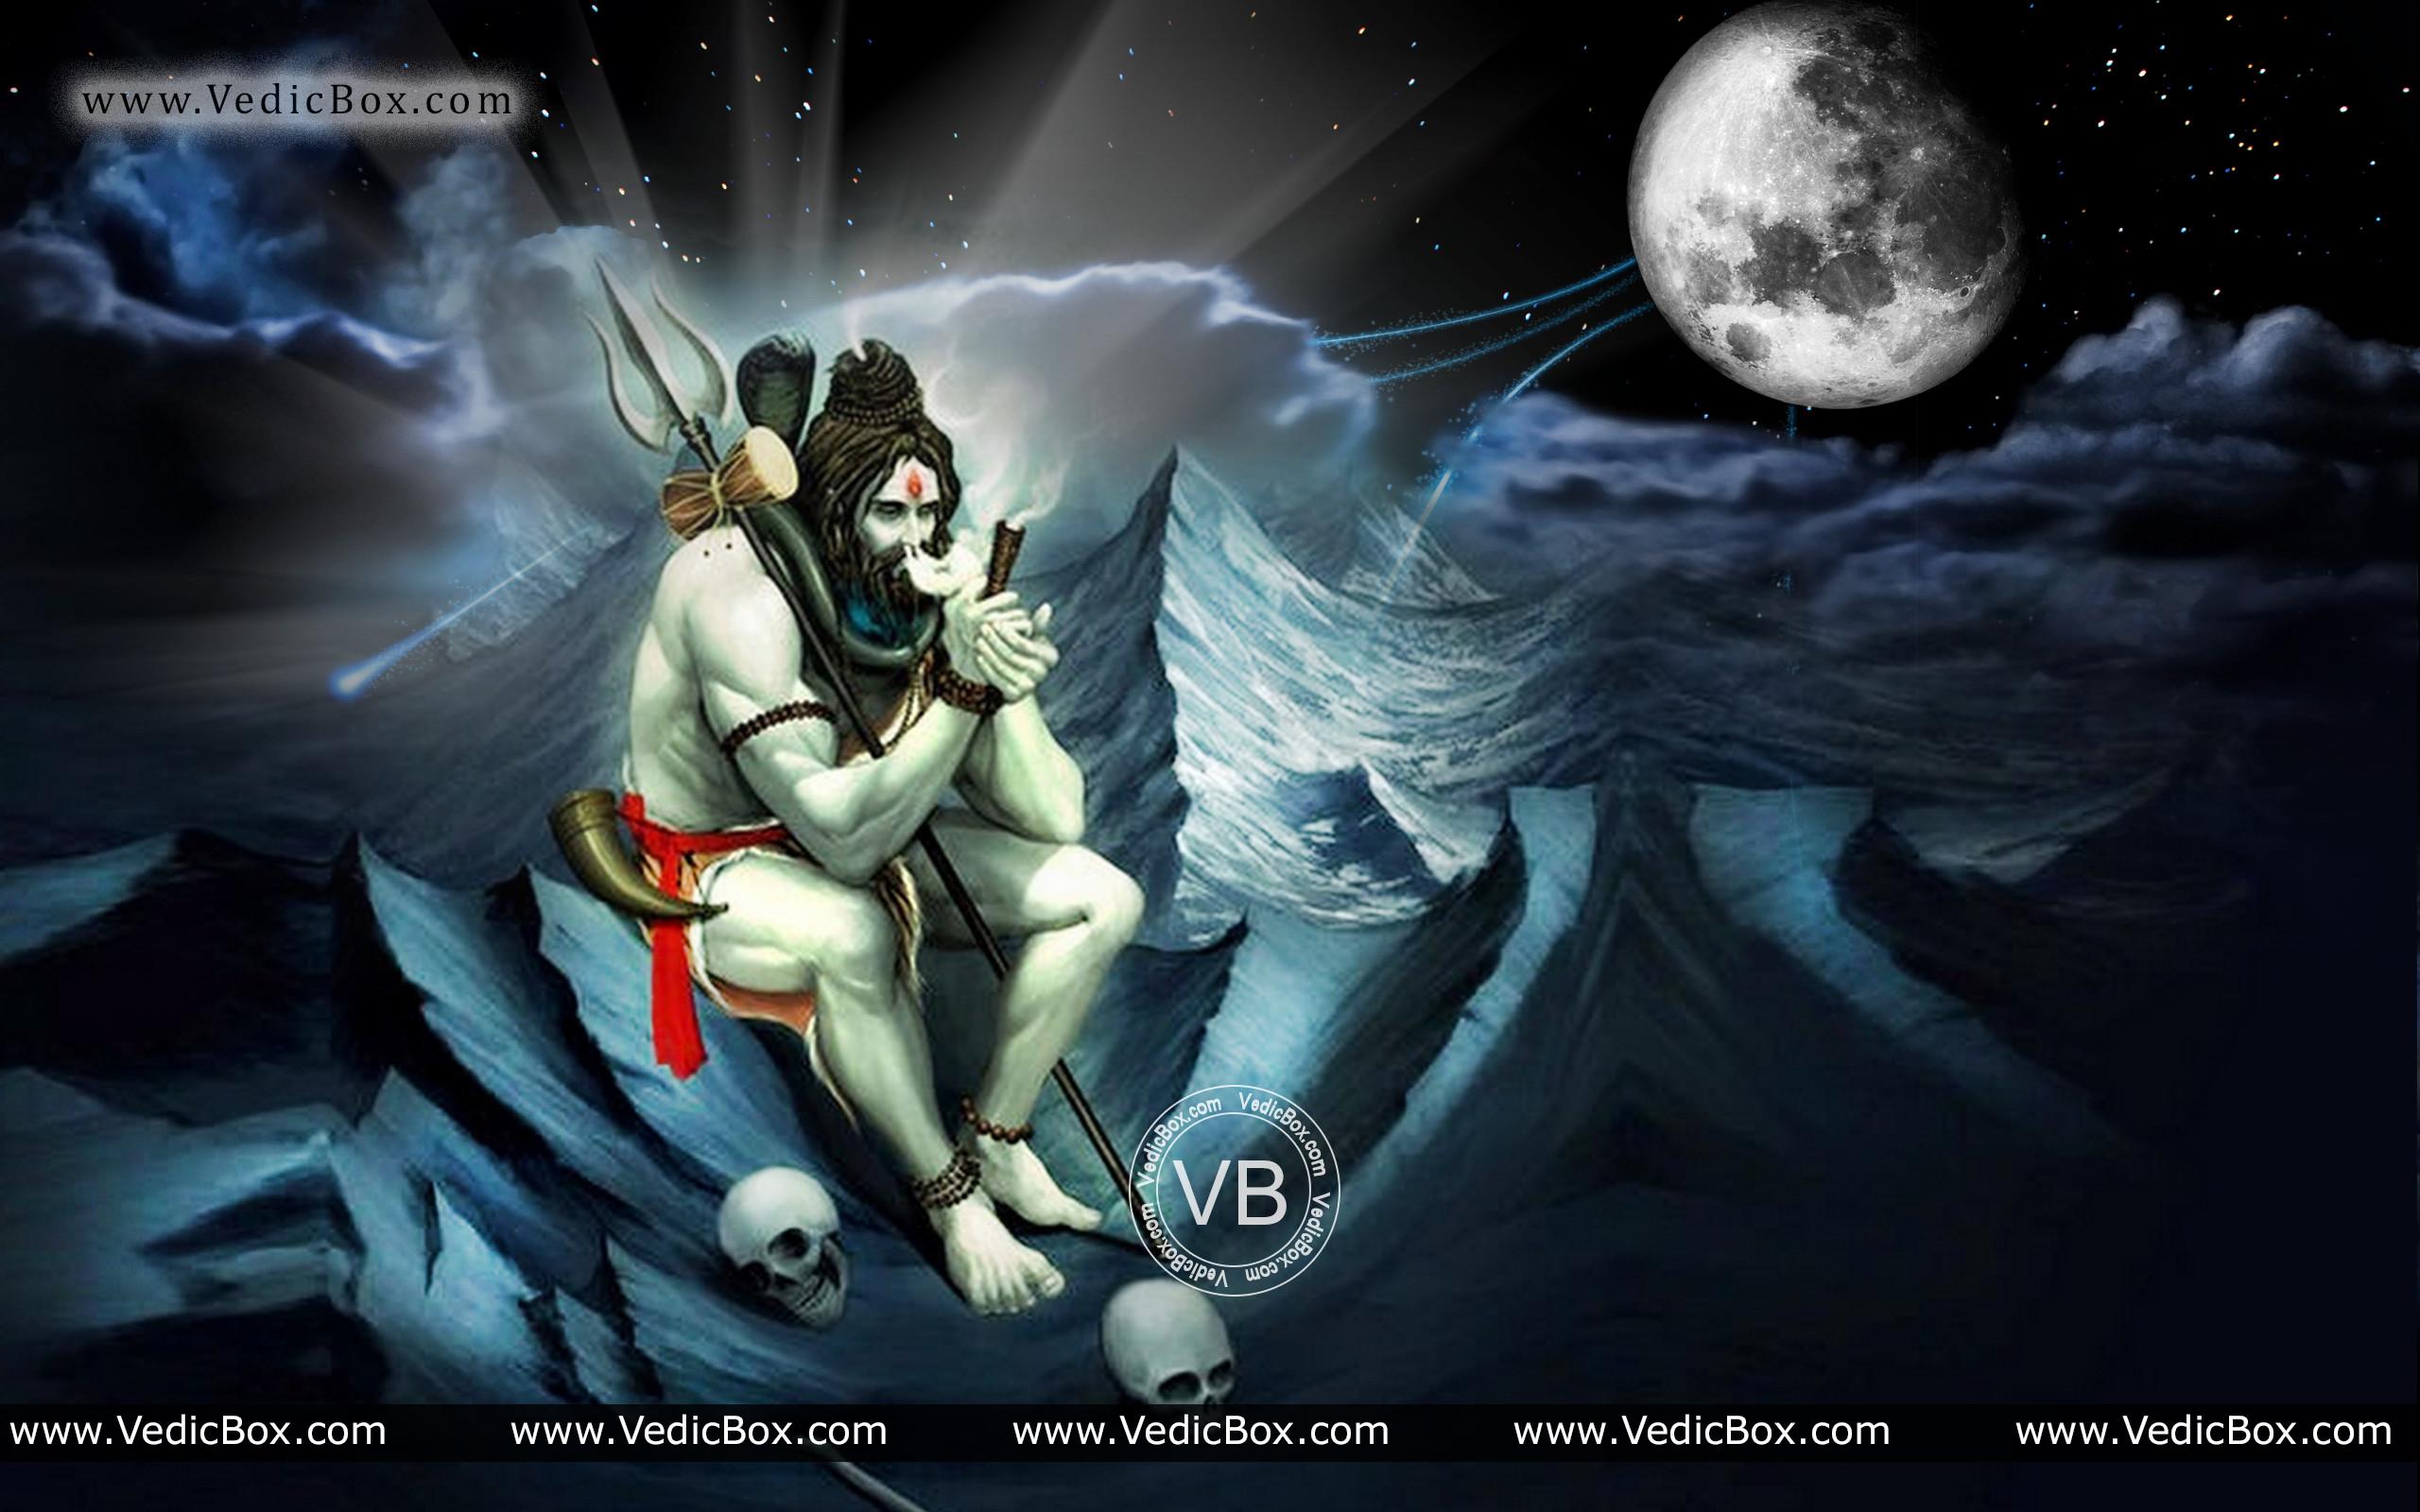 147 Angry Shiva Images Stock Photos  Vectors  Shutterstock